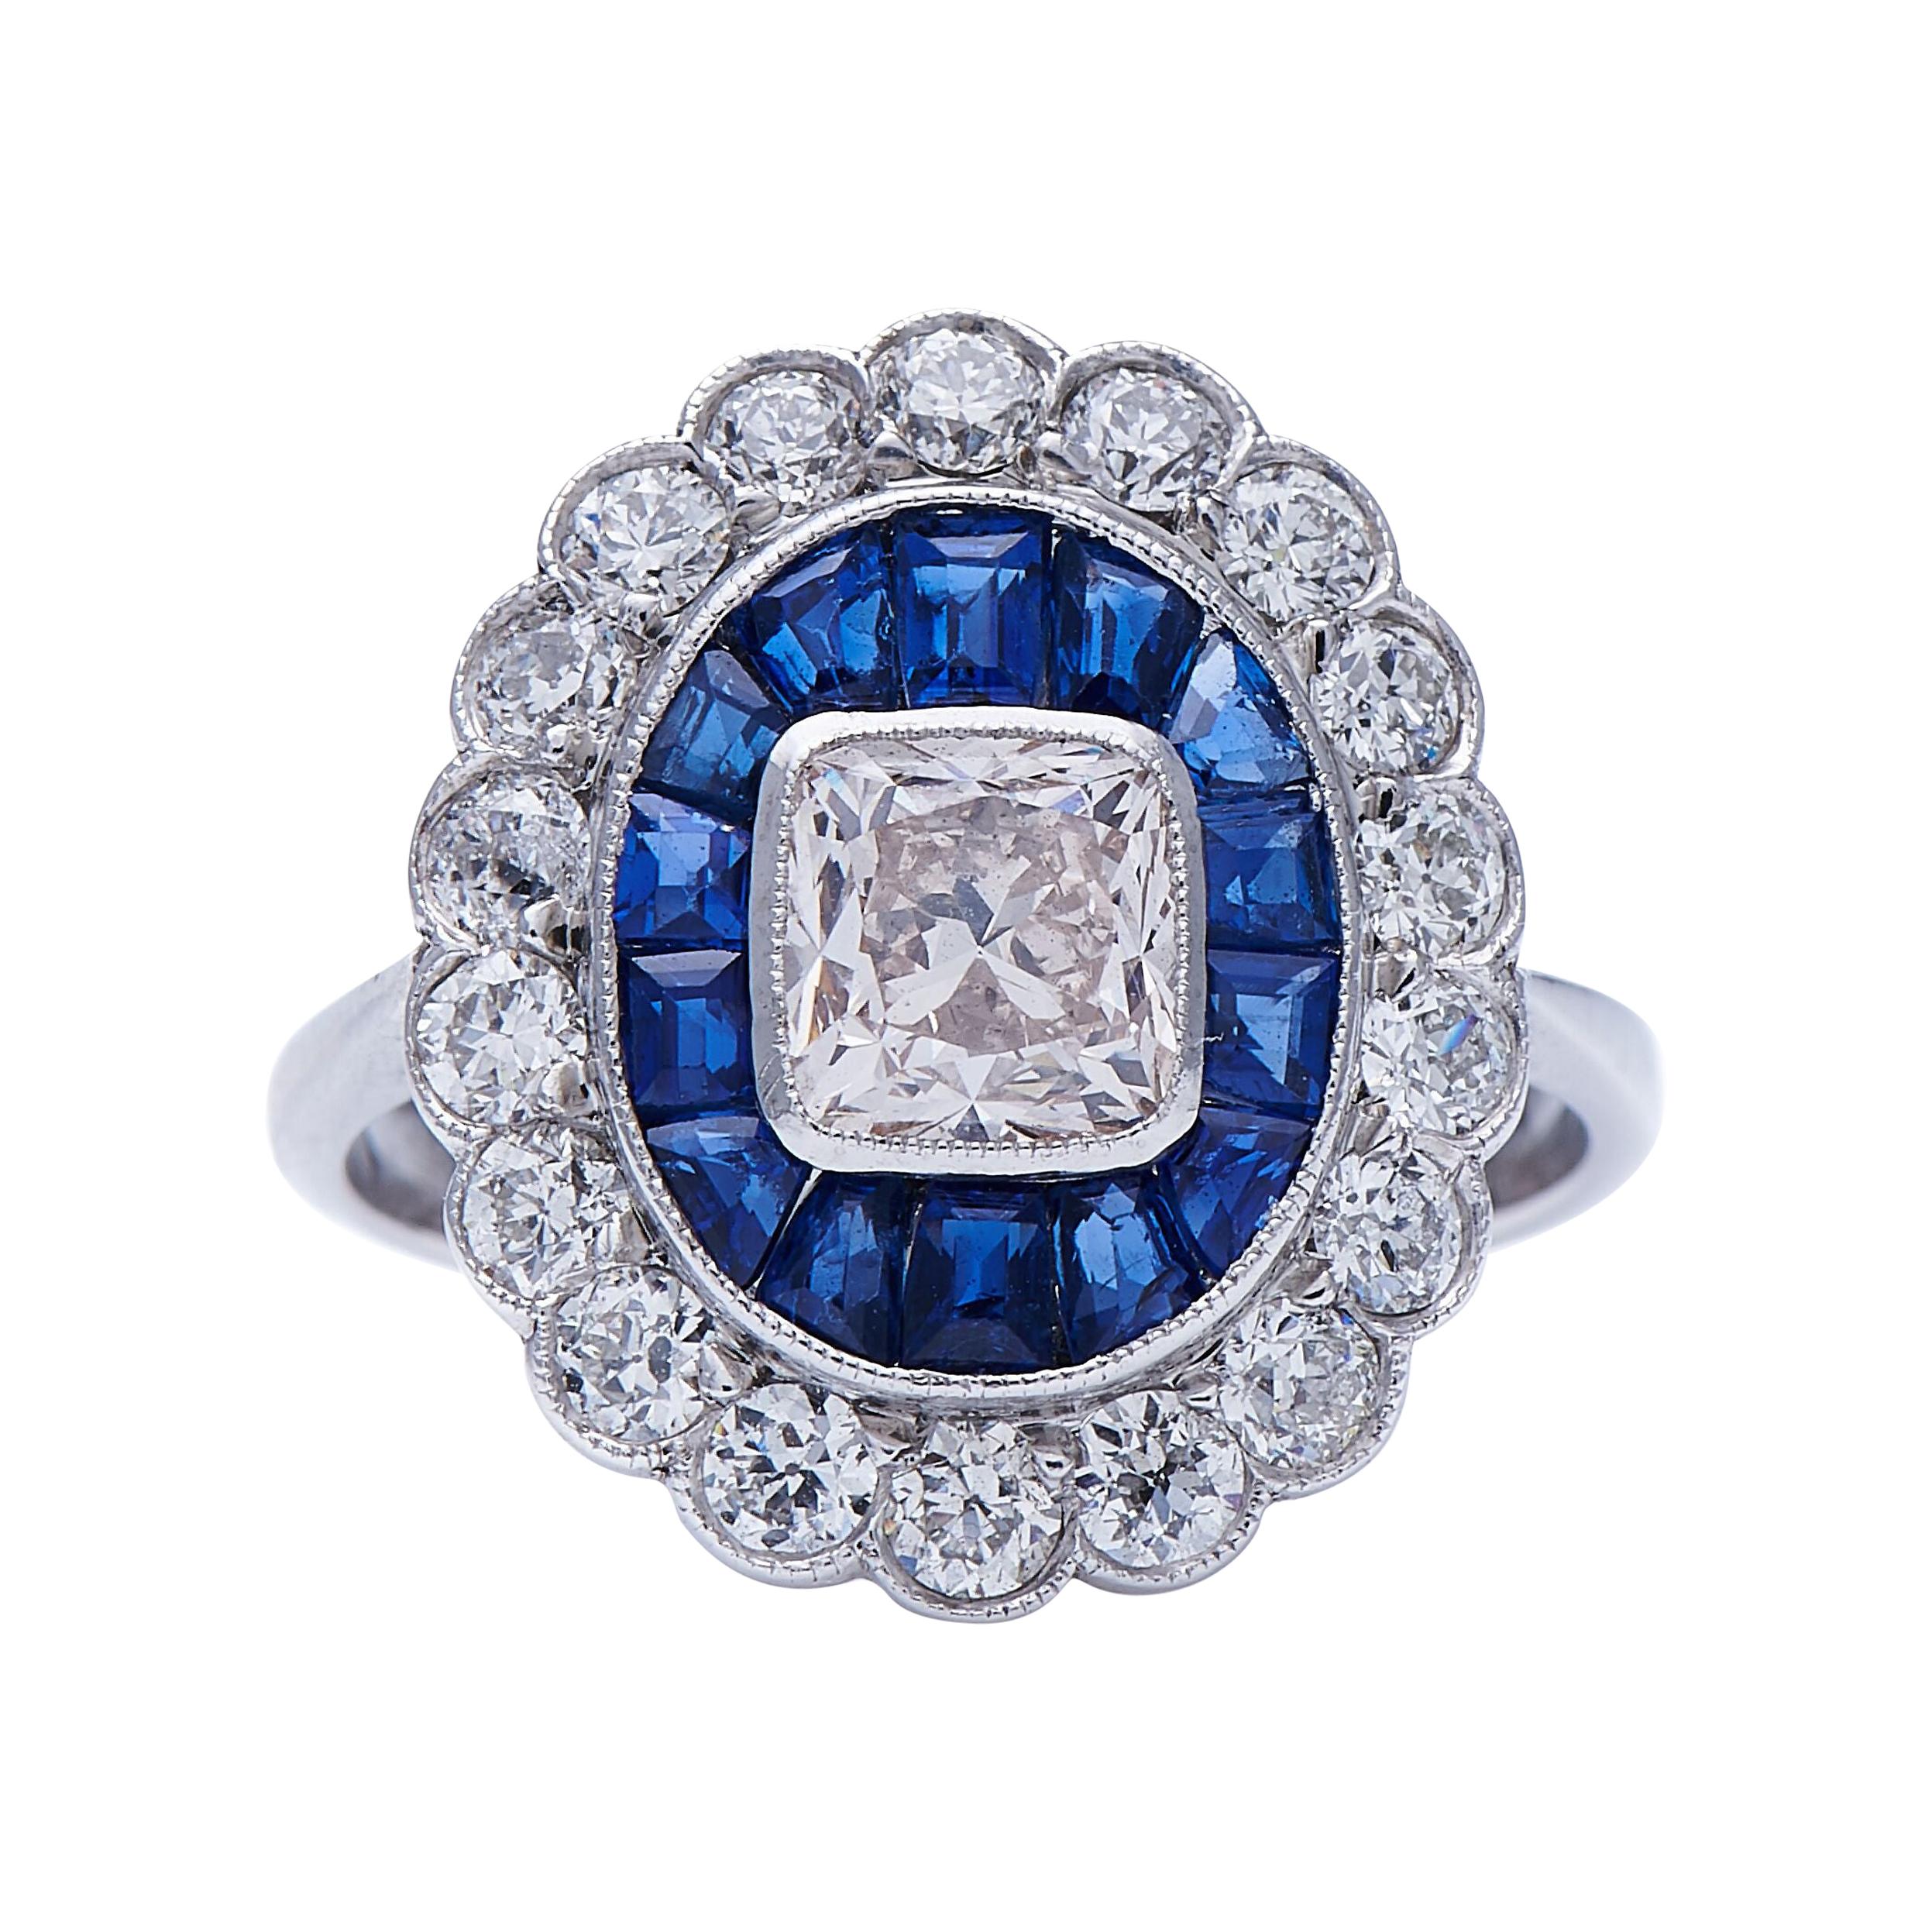 Art Deco, 18 Carat White Gold, Diamond and Sapphire Cluster Ring